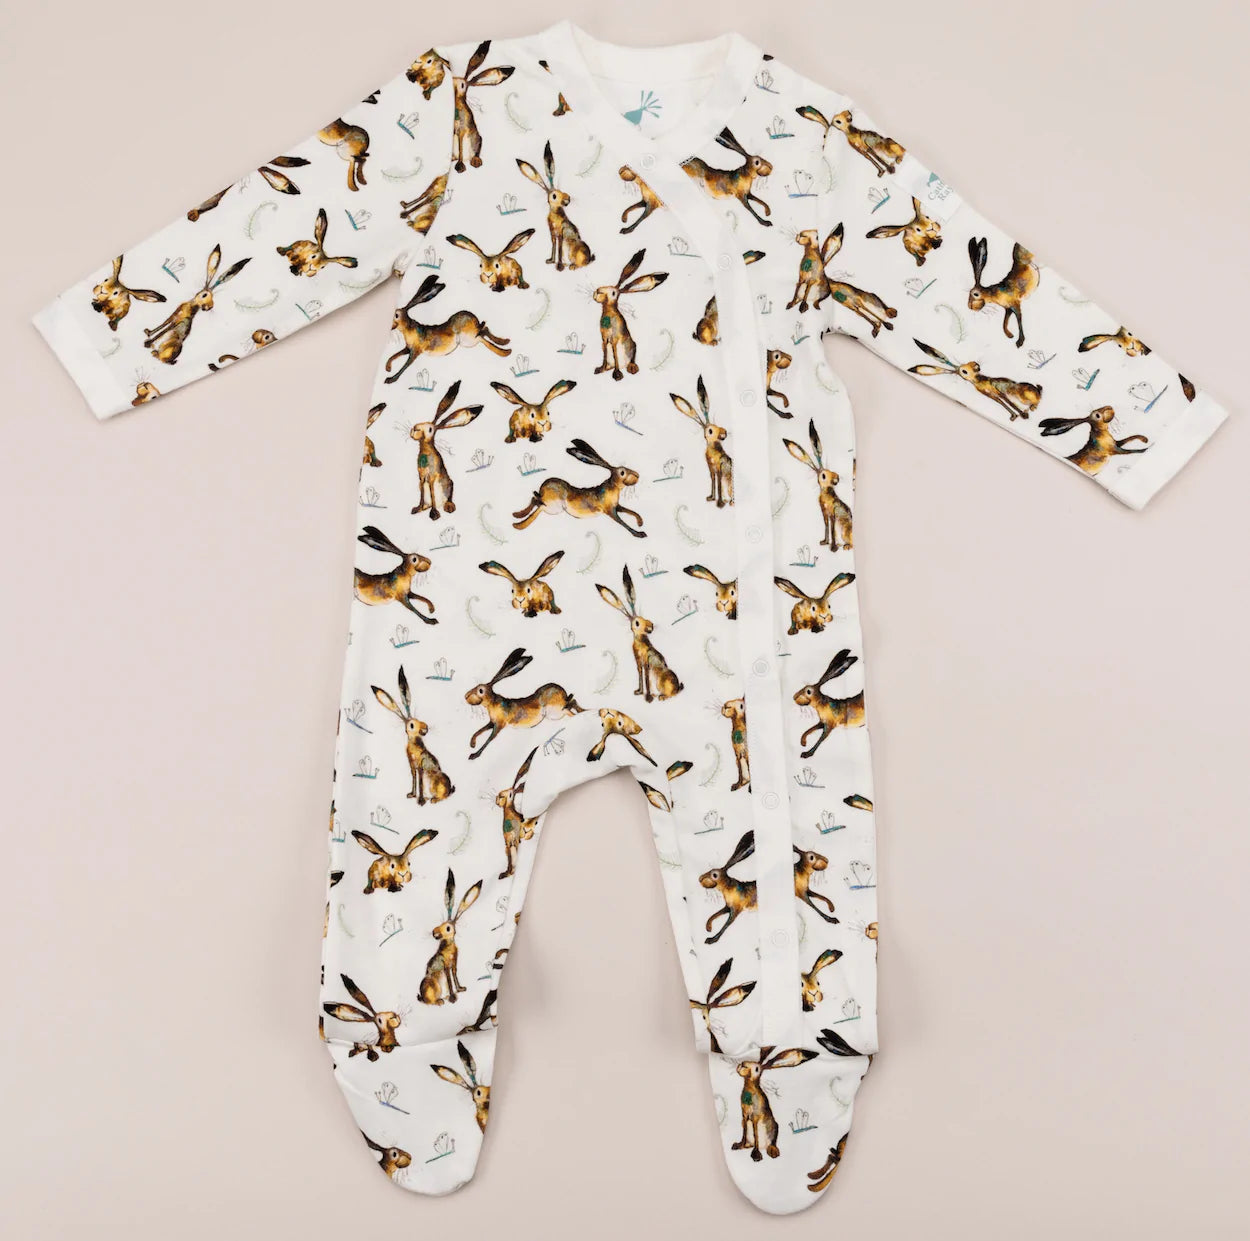 Hare Unisex Pure Cotton Baby Grow